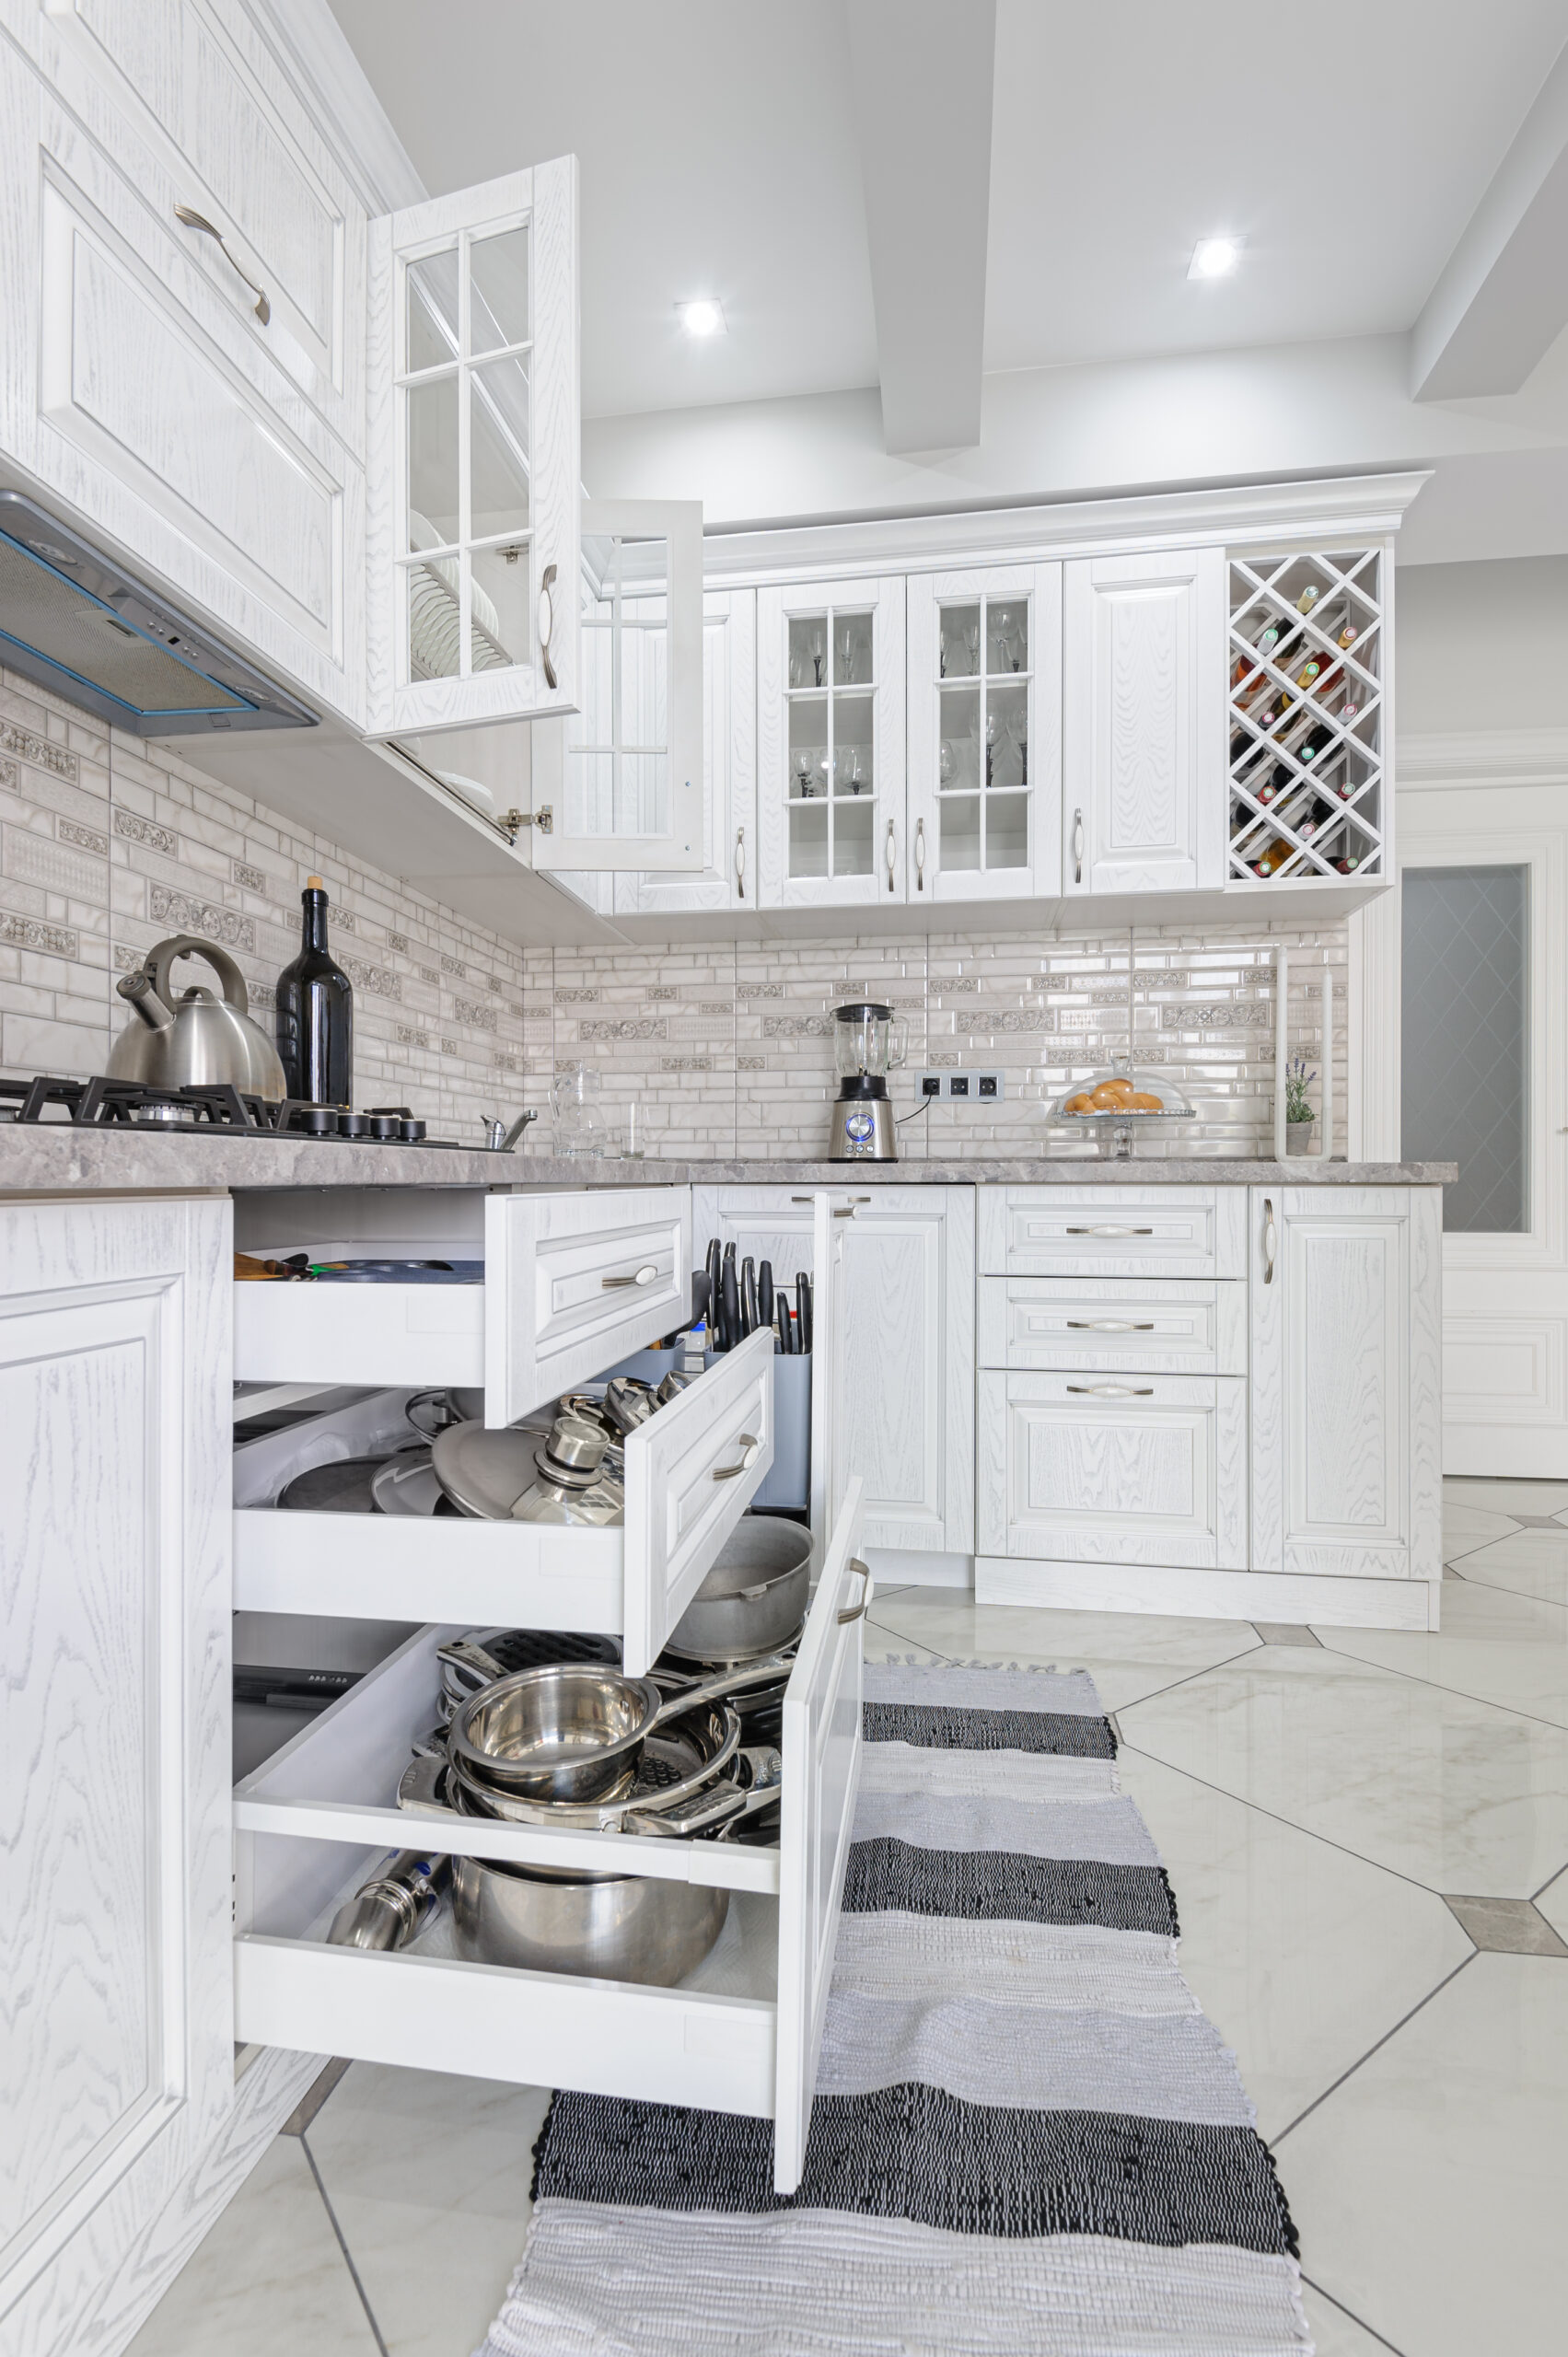 Chic and sophisticated kitchen cabinet painting in Newmarket - Chantilly Lace by Benjamin Moore adorns these beautifully spray-painted cabinets, creating a stylish focal point.